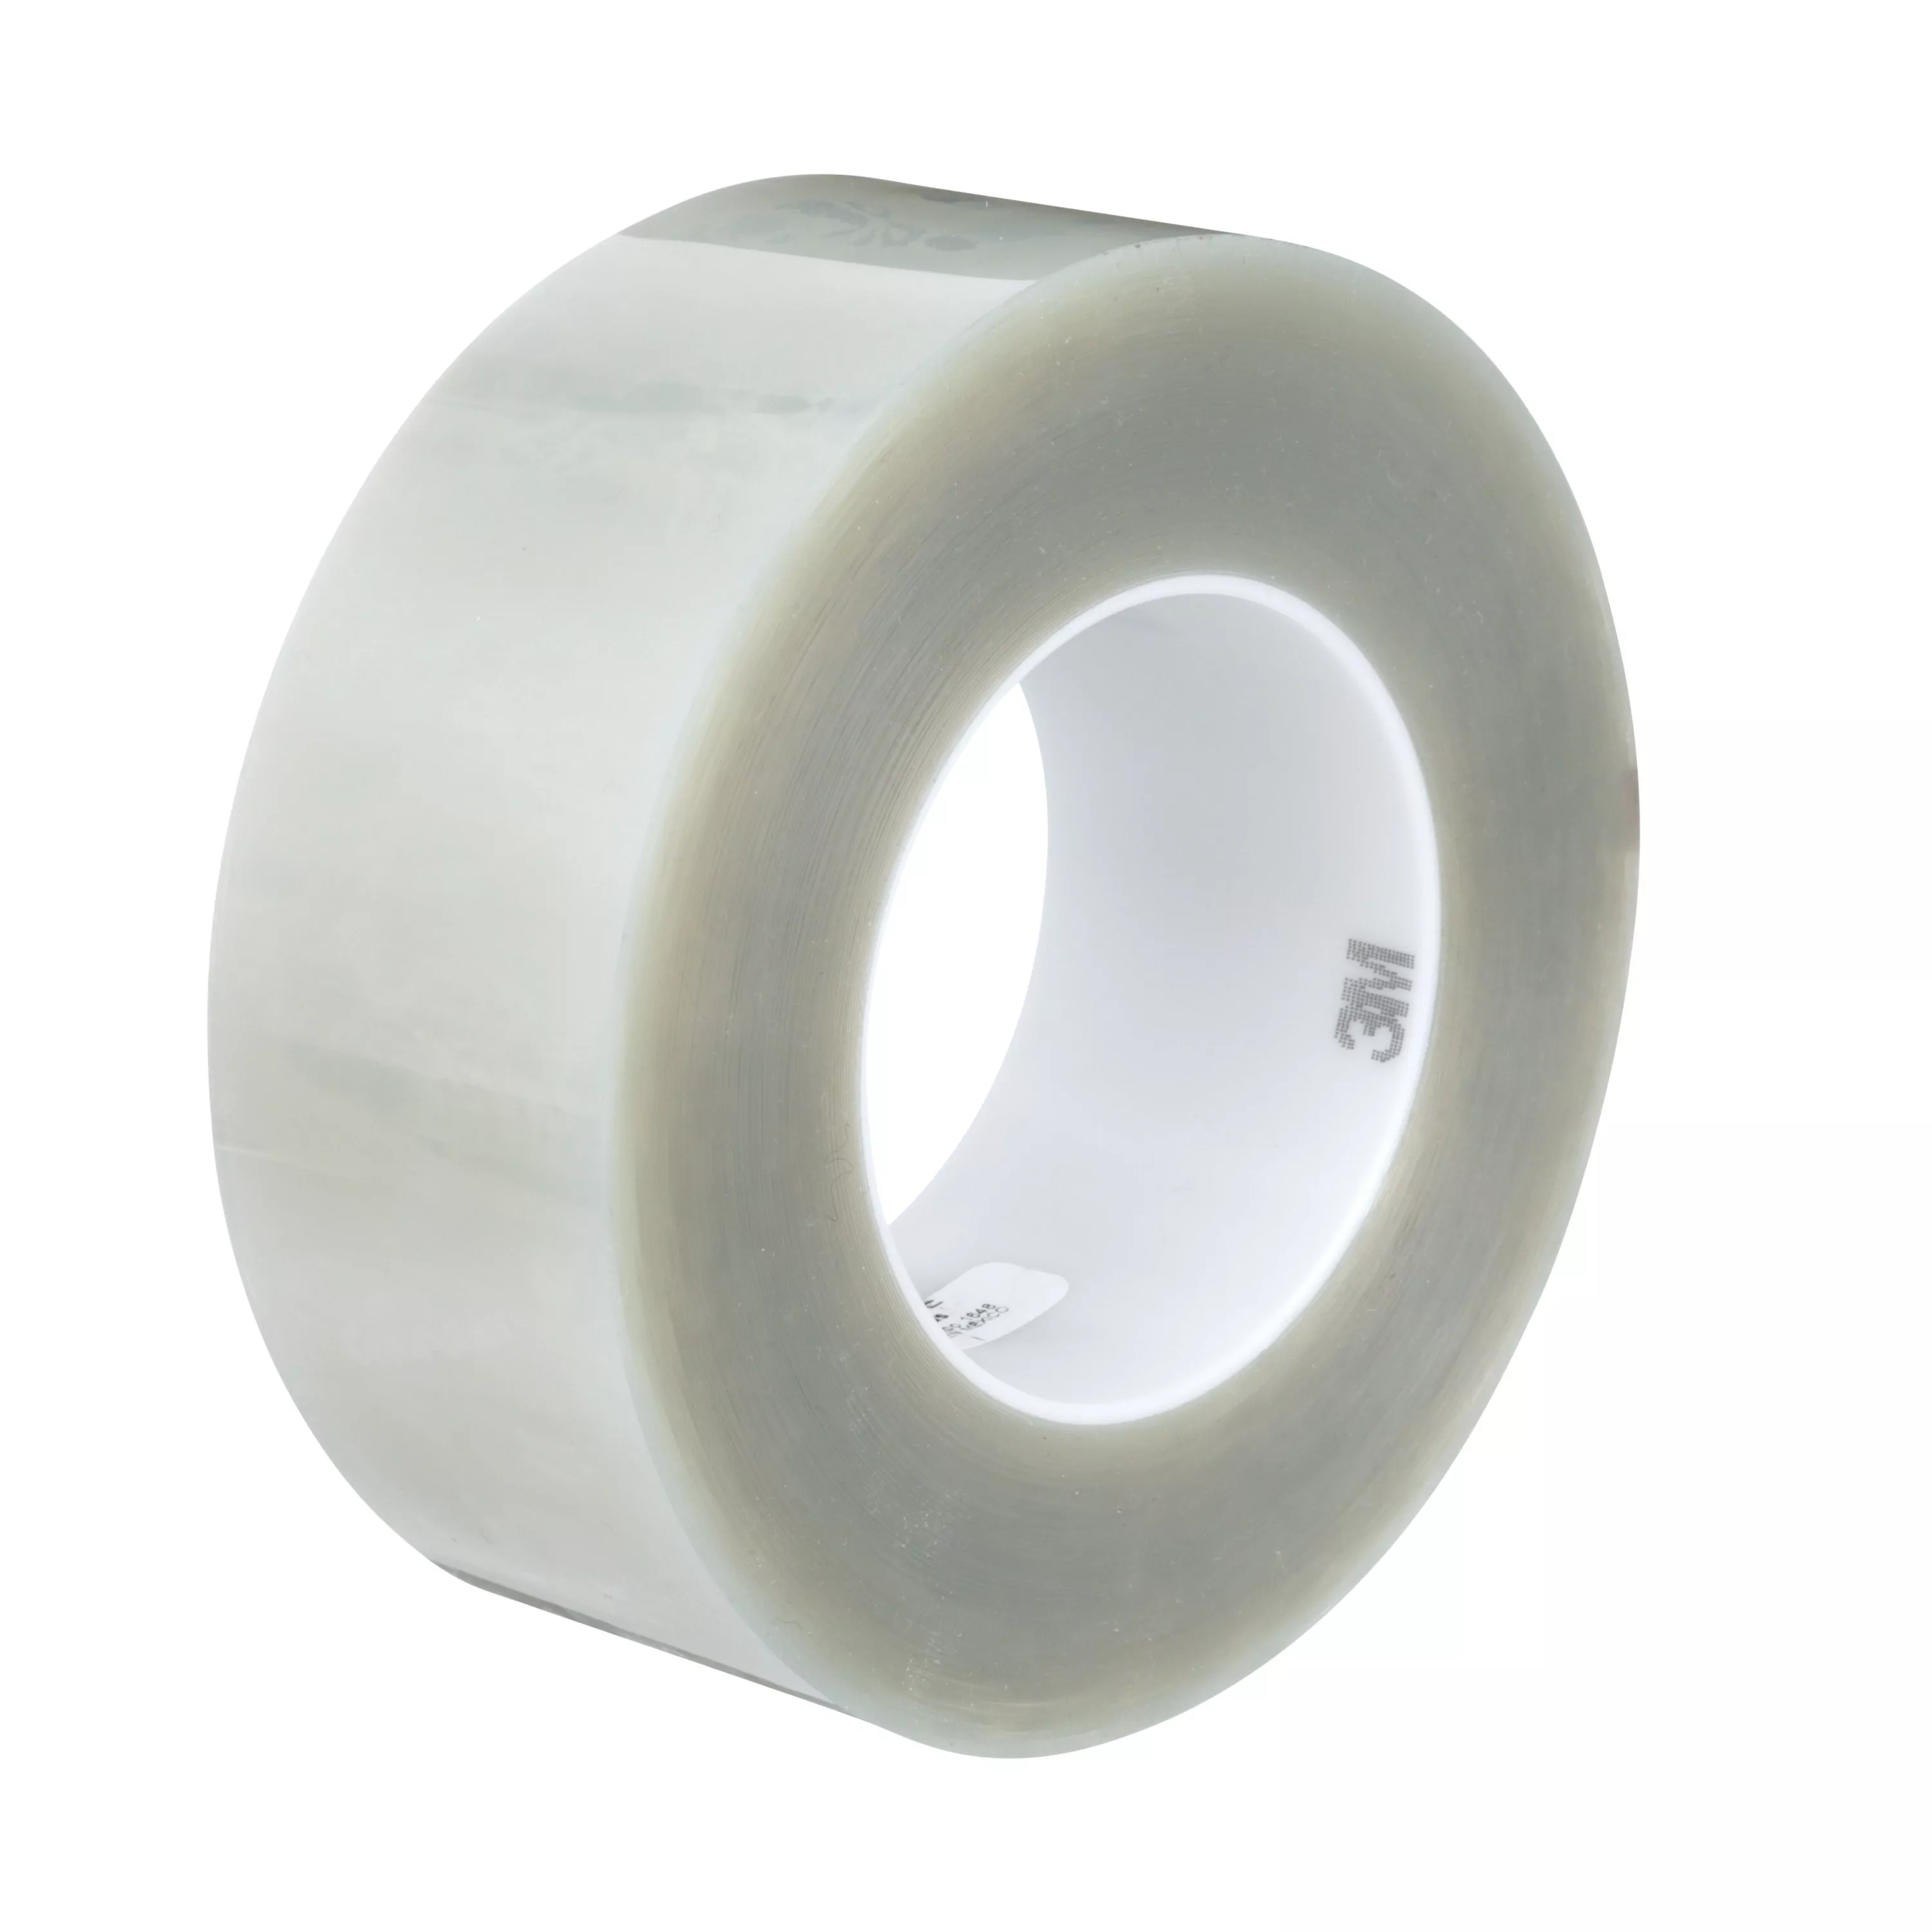 3M™ Polyester Tape 8412, Transparent, 2 in x 72 yd, 6.3 mil, 24
Roll/Case